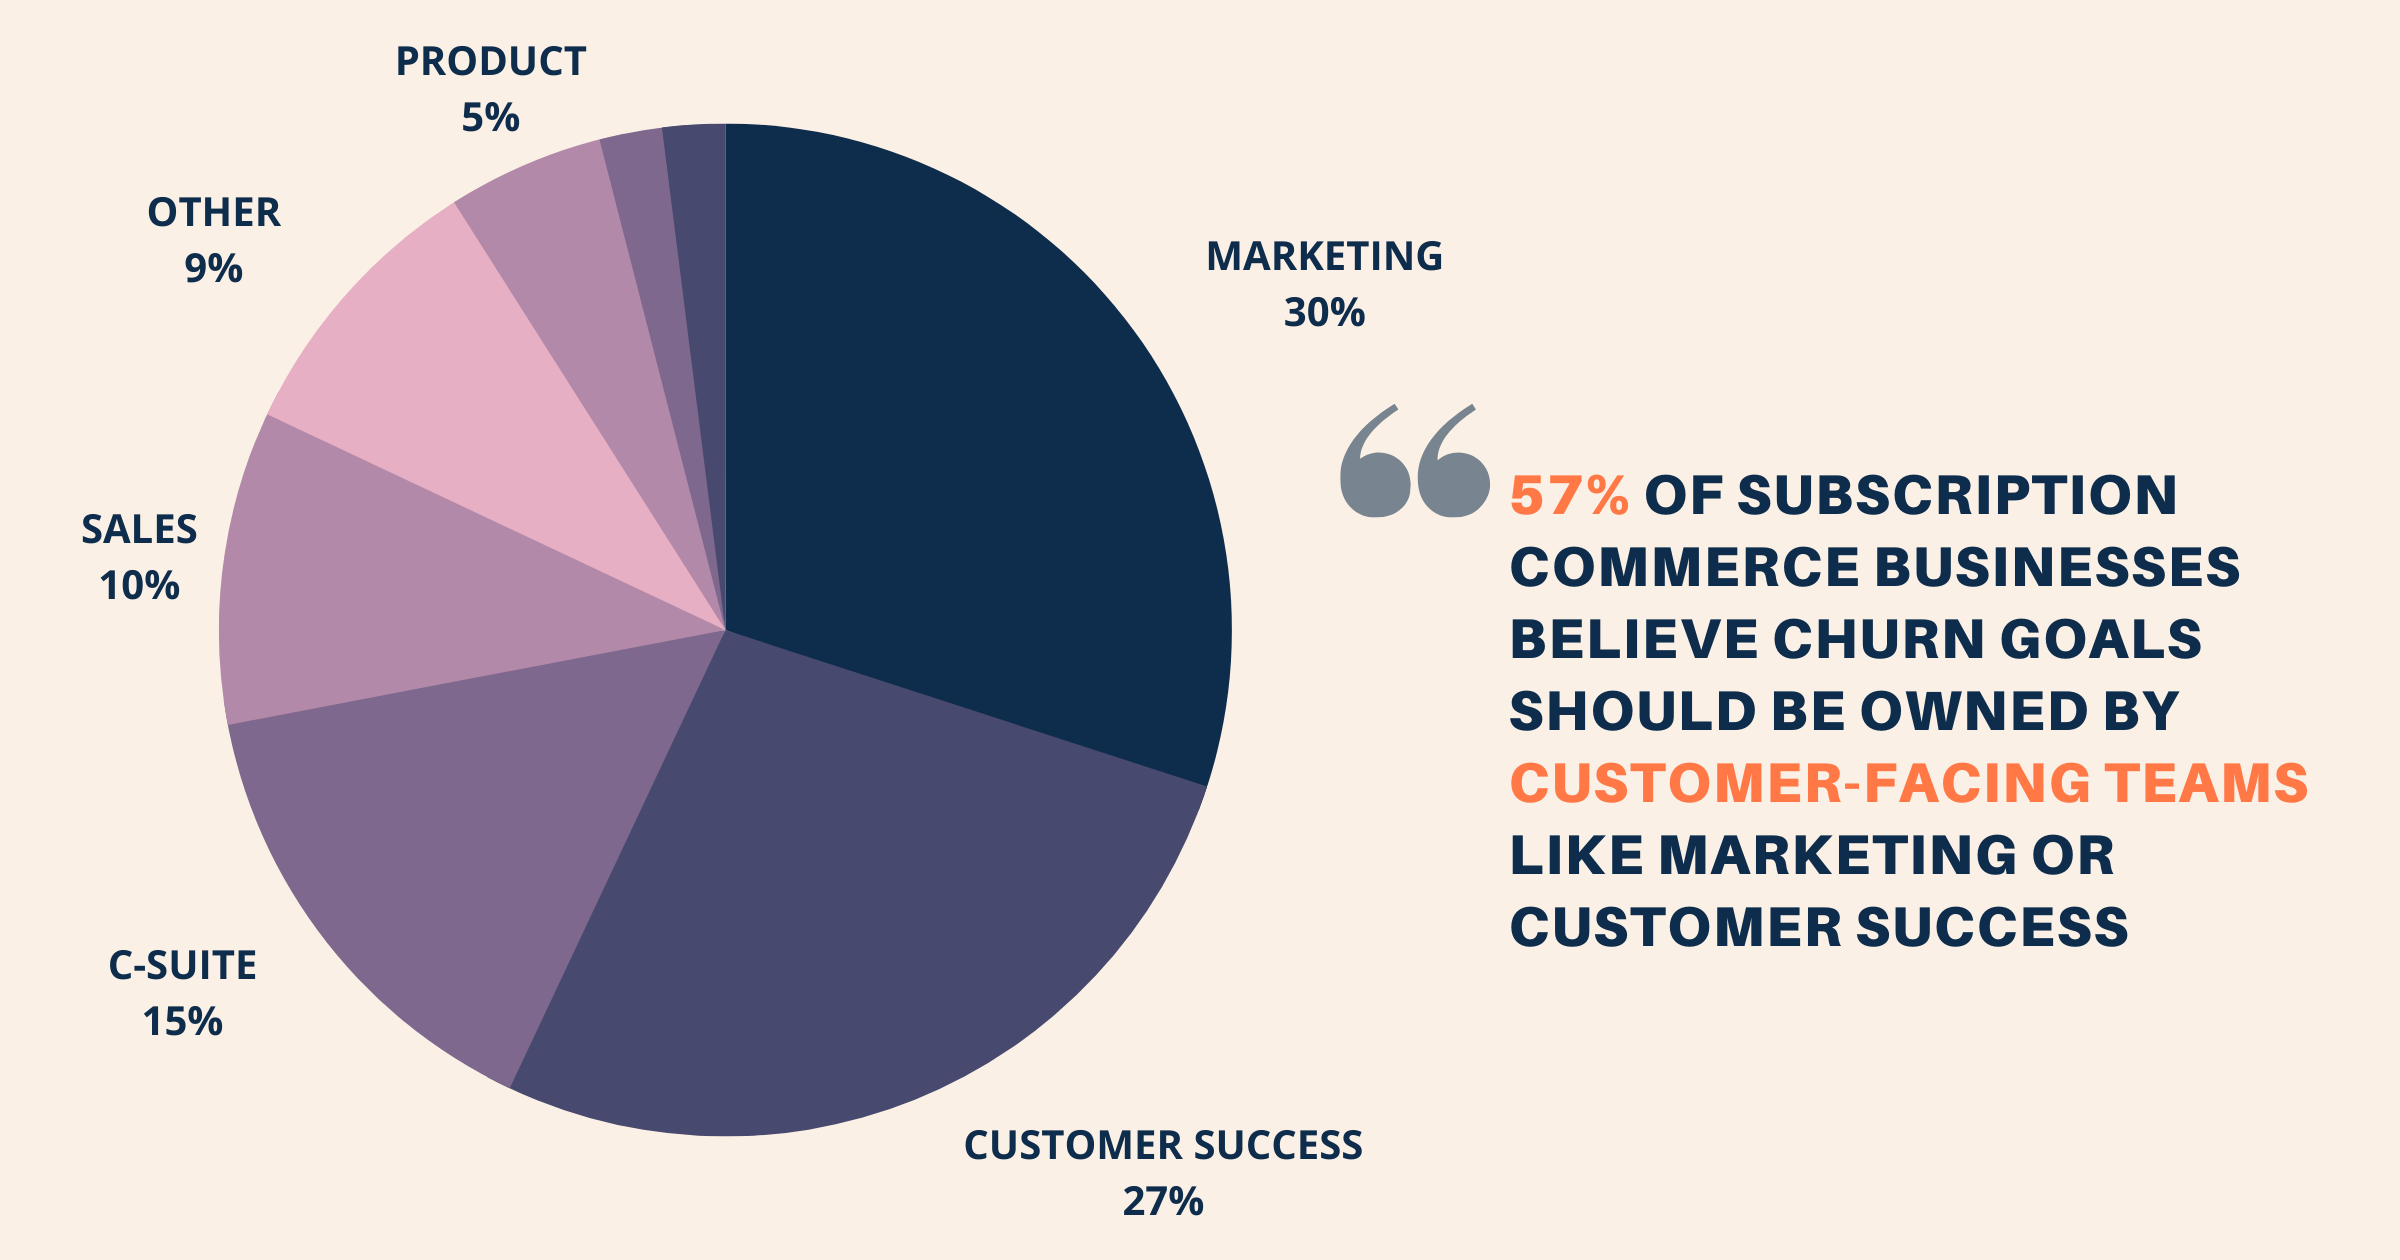 57% of subscription eCommerce businesses believe churn goals in an organization should be owned by marketing, customer success and other customer-facing teams